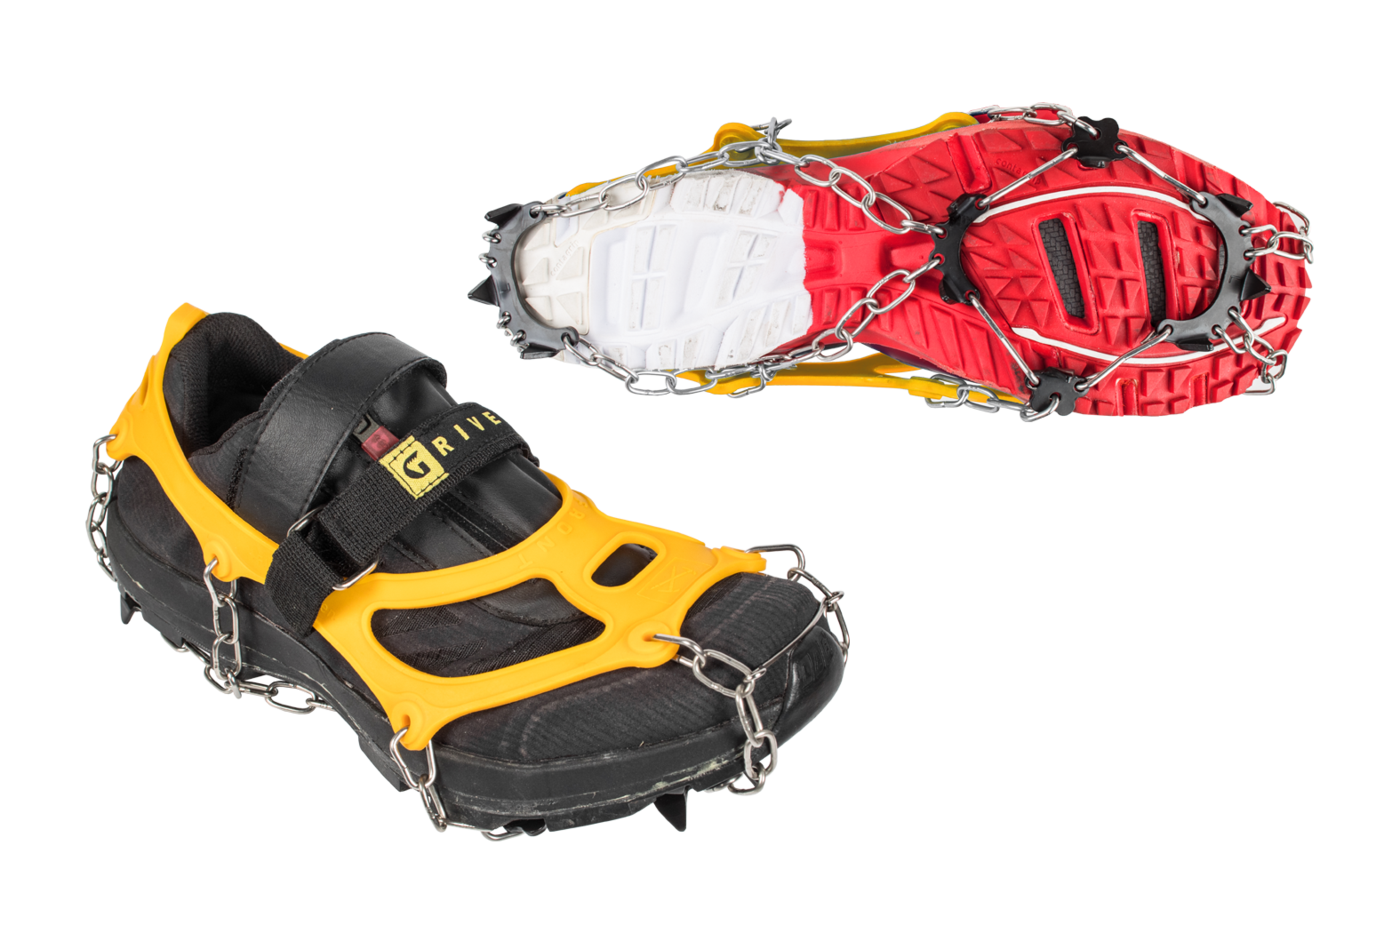 Grivel Ran light - Chaines chaussures | Hardloop